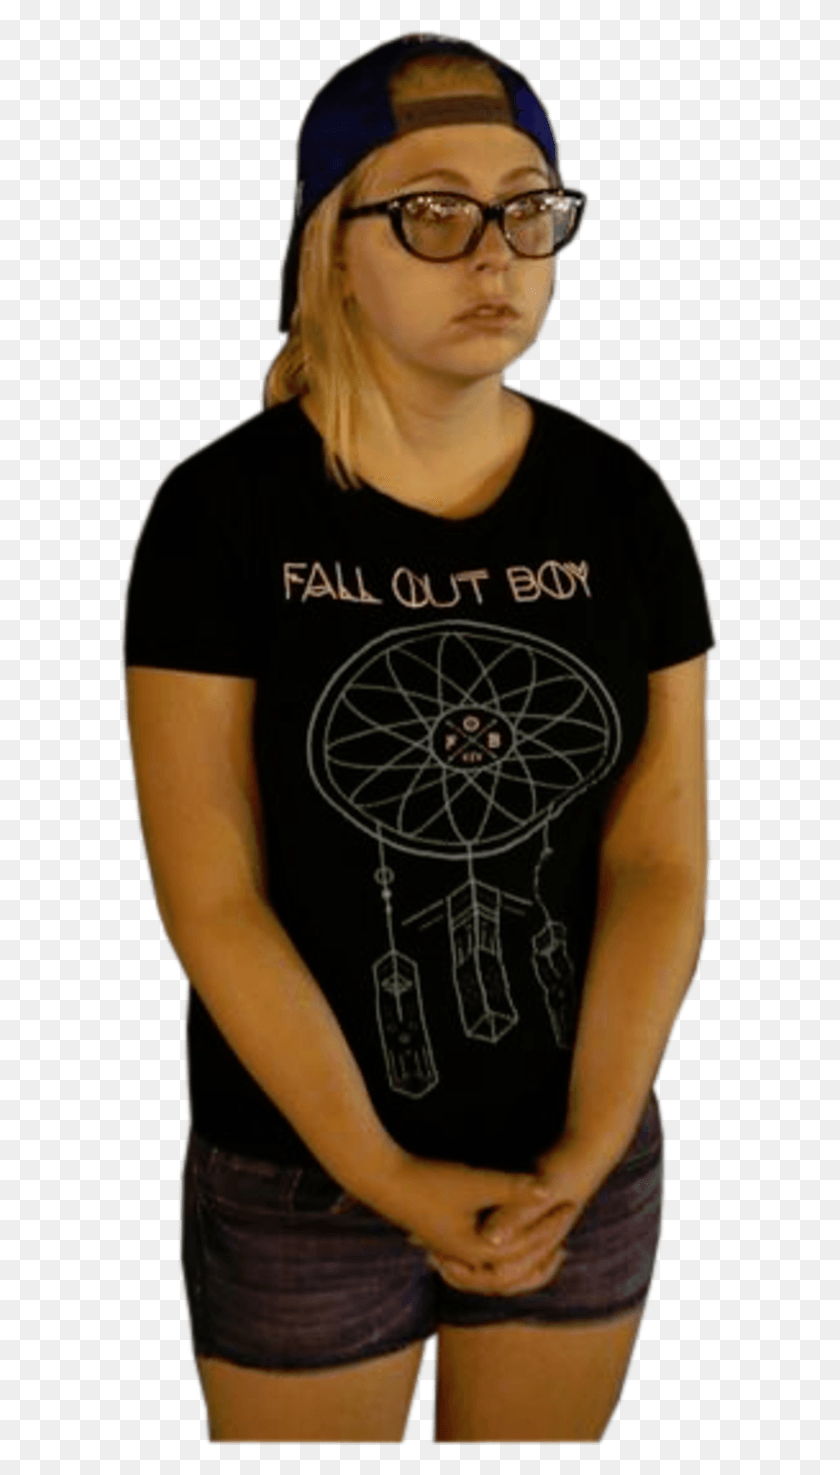 600x1415 Fall Out Boy Fan Protecting Ferguson Police Active Shirt, Ropa, Vestimenta, Persona Hd Png